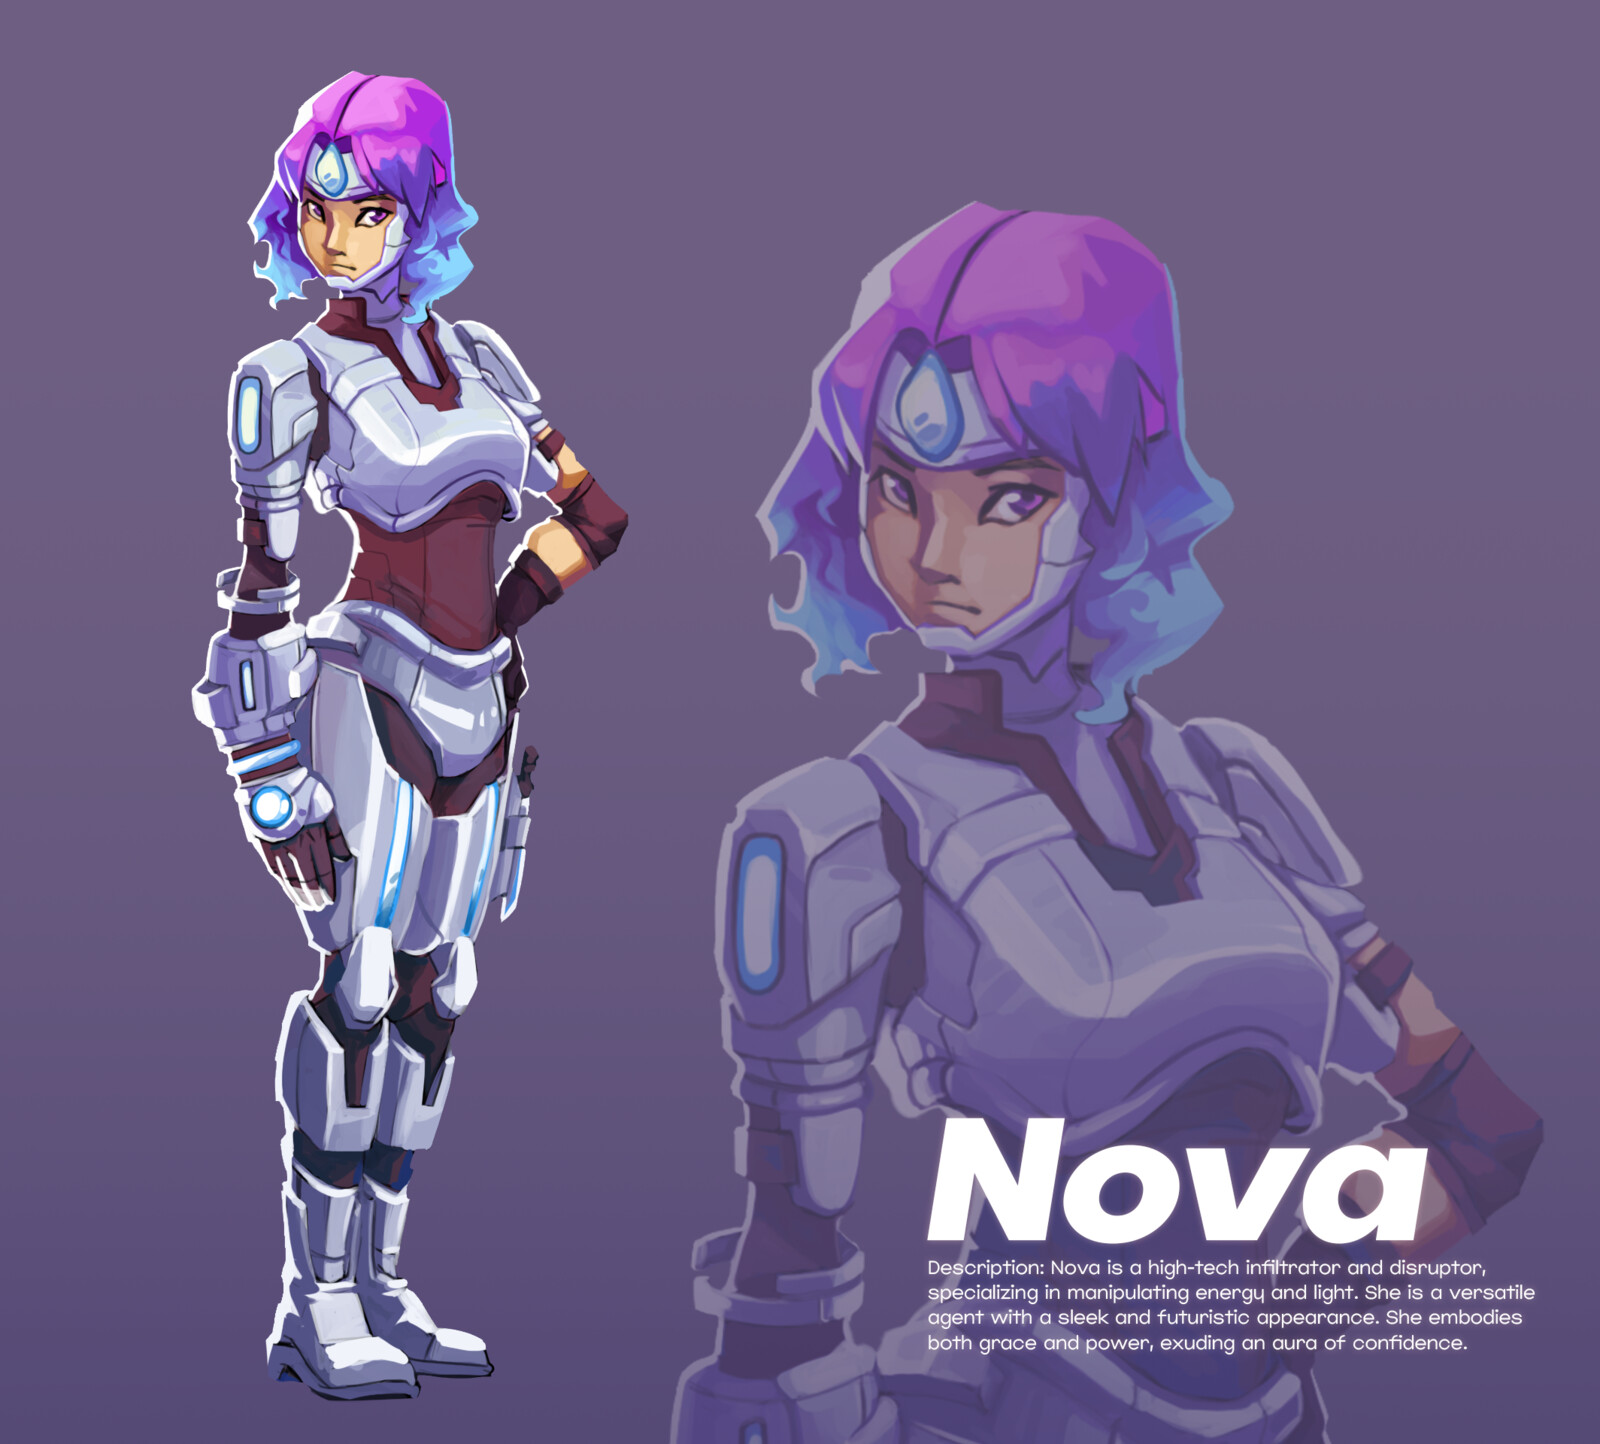 Nova is a high-tech infiltrator and disruptor, specializing in manipulating energy and light. She is a versatile agent with a sleek and futuristic appearance. She embodies both grace and power, exuding an aura of confidence.